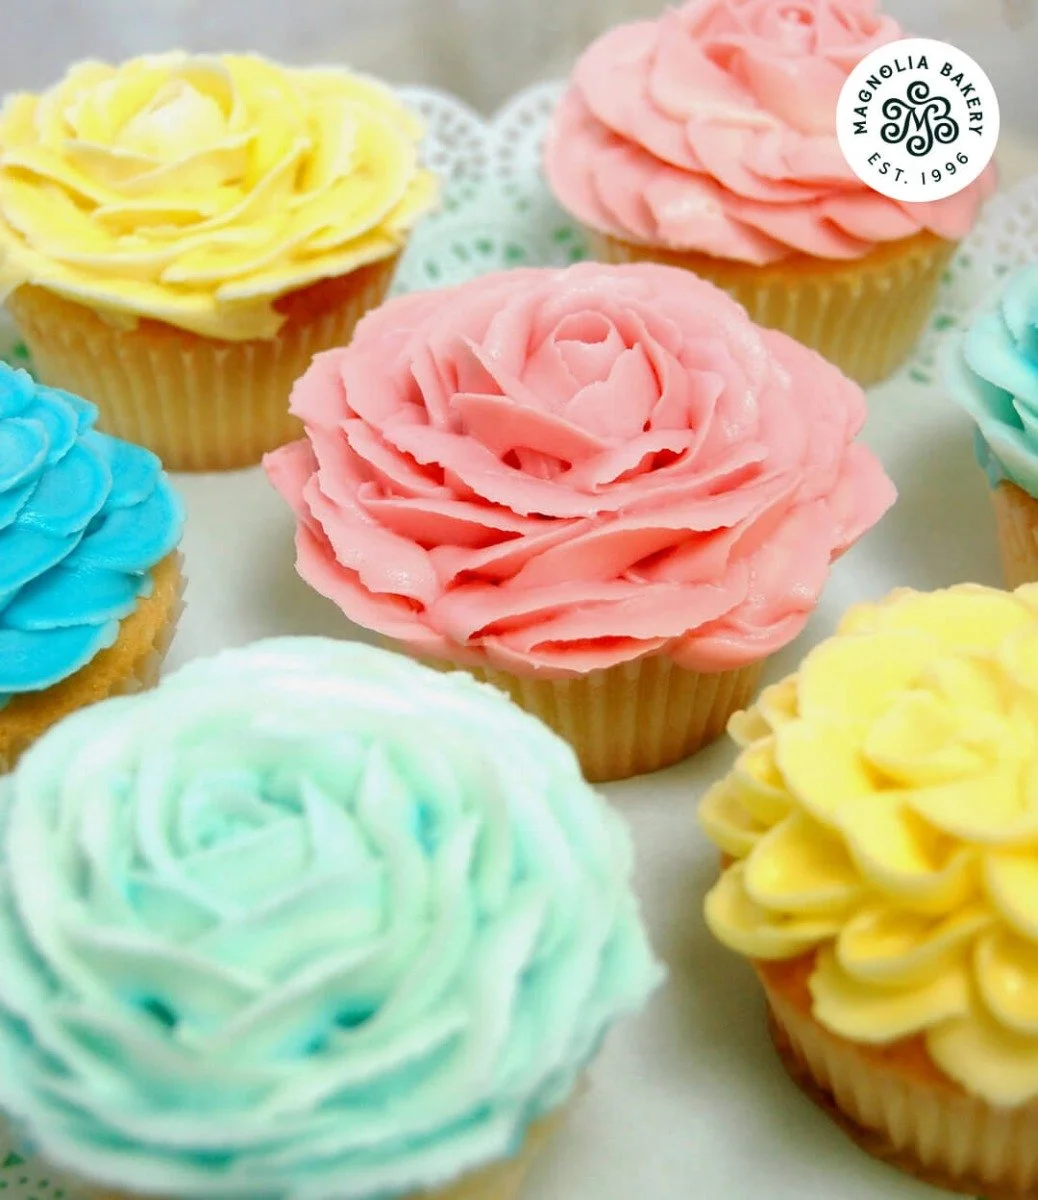 6 Flower Cupcakes by Magnolia Bakery